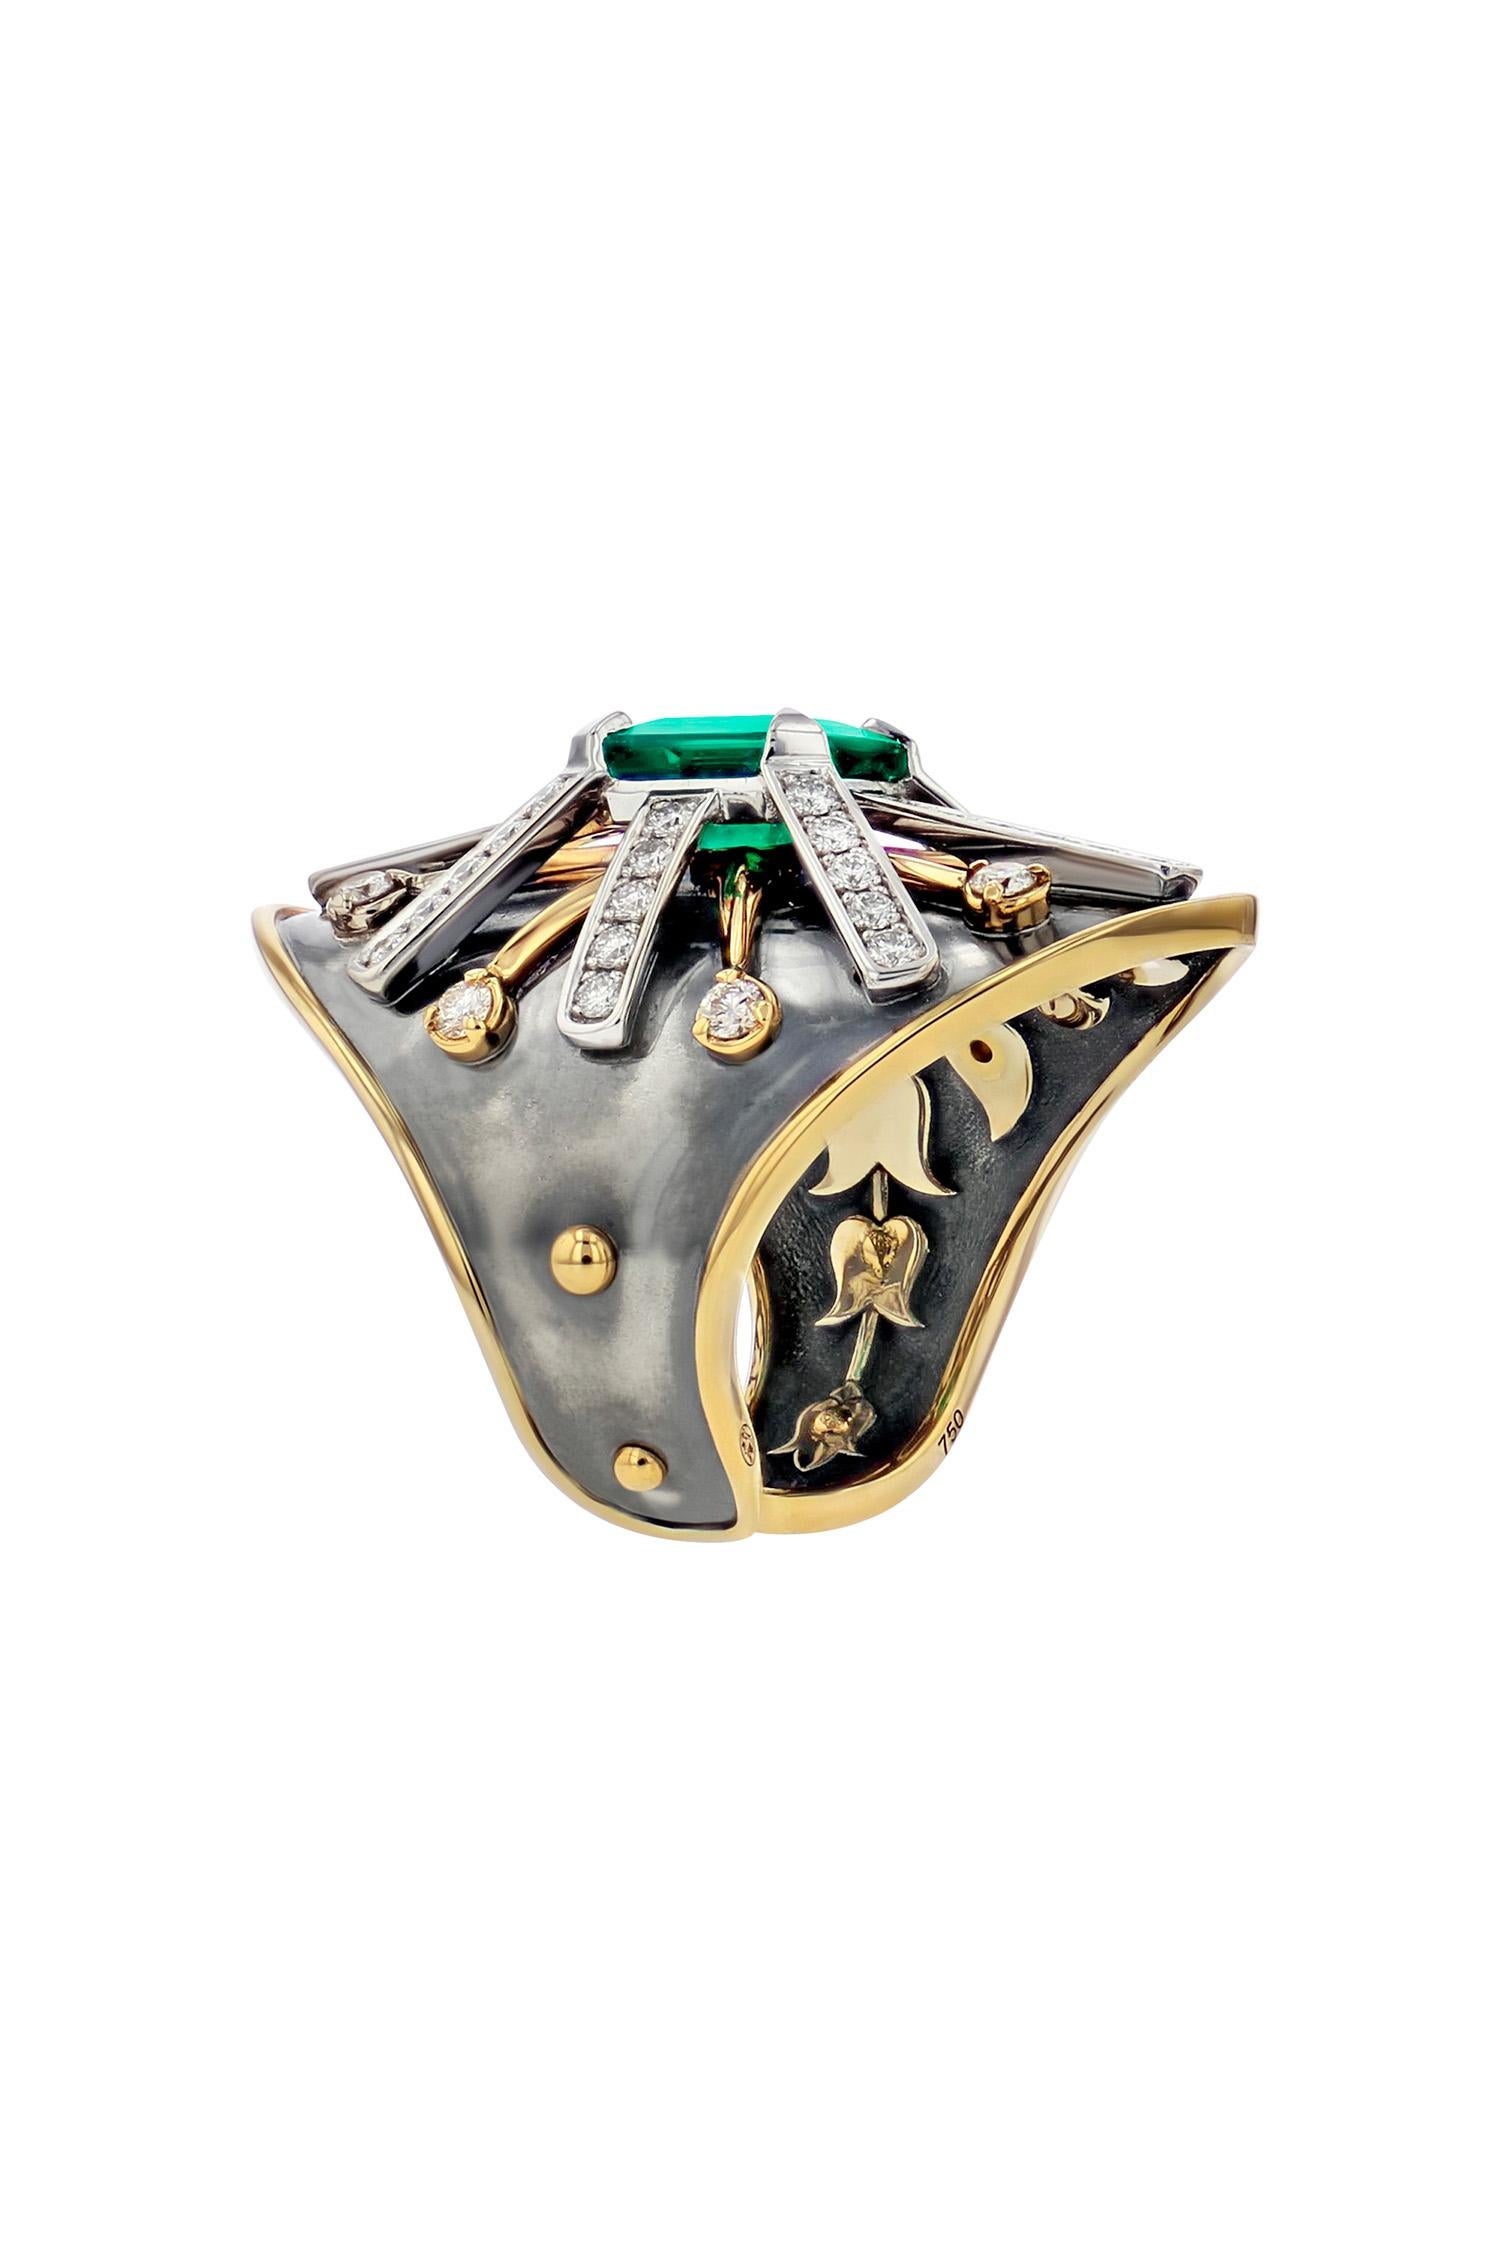 Neoclassical Emerald & Diamond Ecu Ring in 18k Gold by Elie Top For Sale